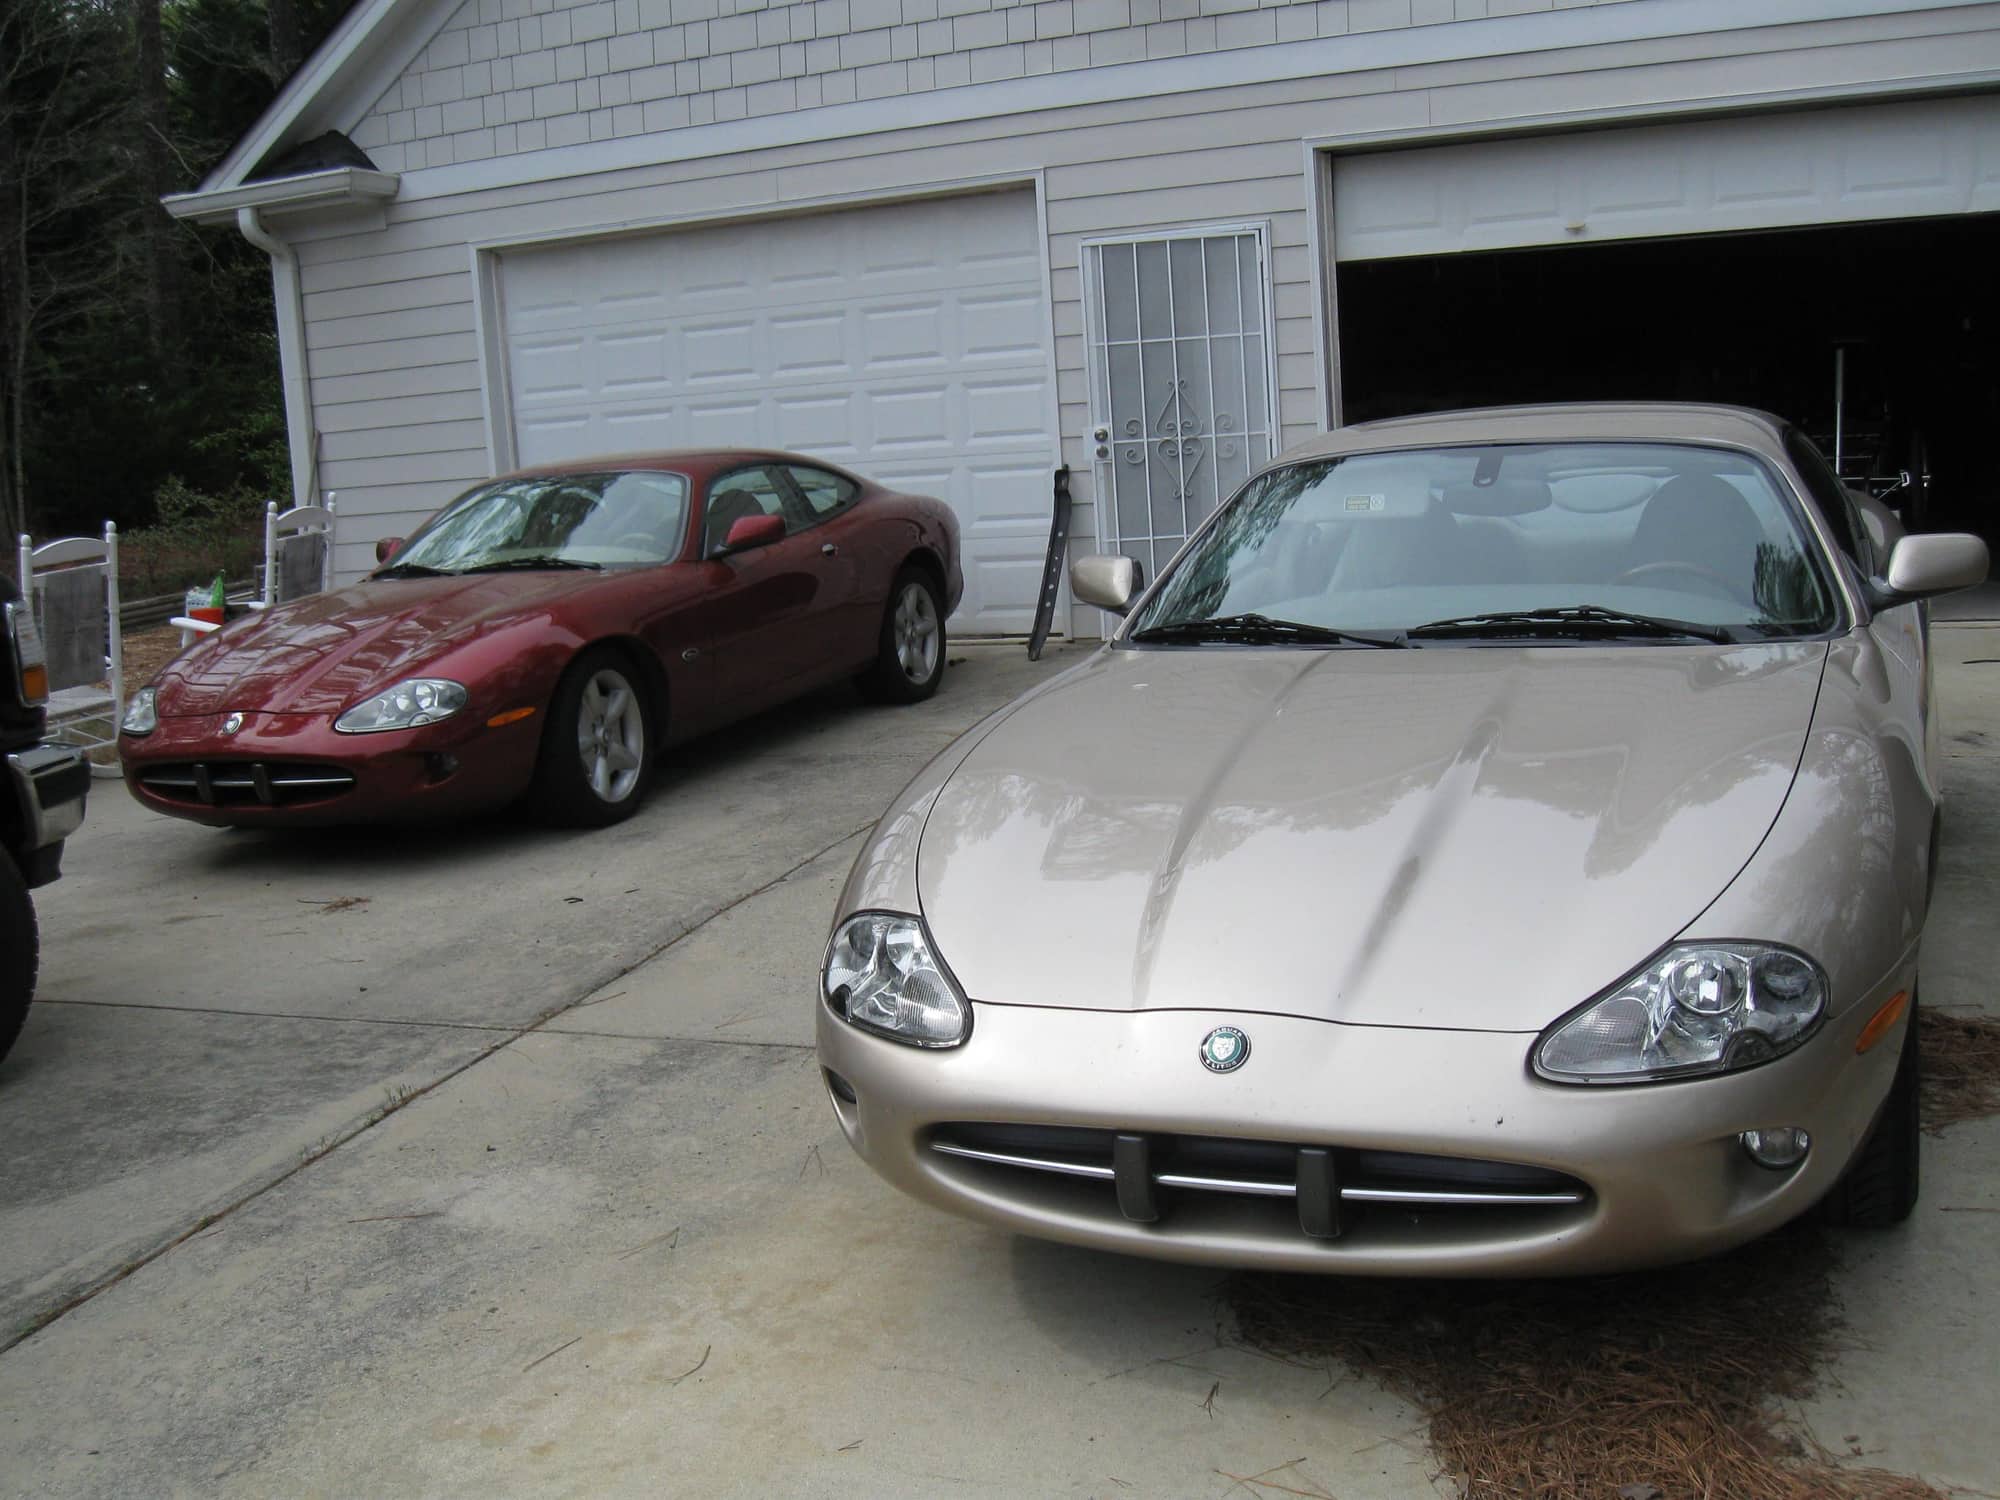 Miscellaneous - 2000 XK8 rolling chassis and parts - Used - 2000 Jaguar XK8 - Dallas, FL 30132, United States